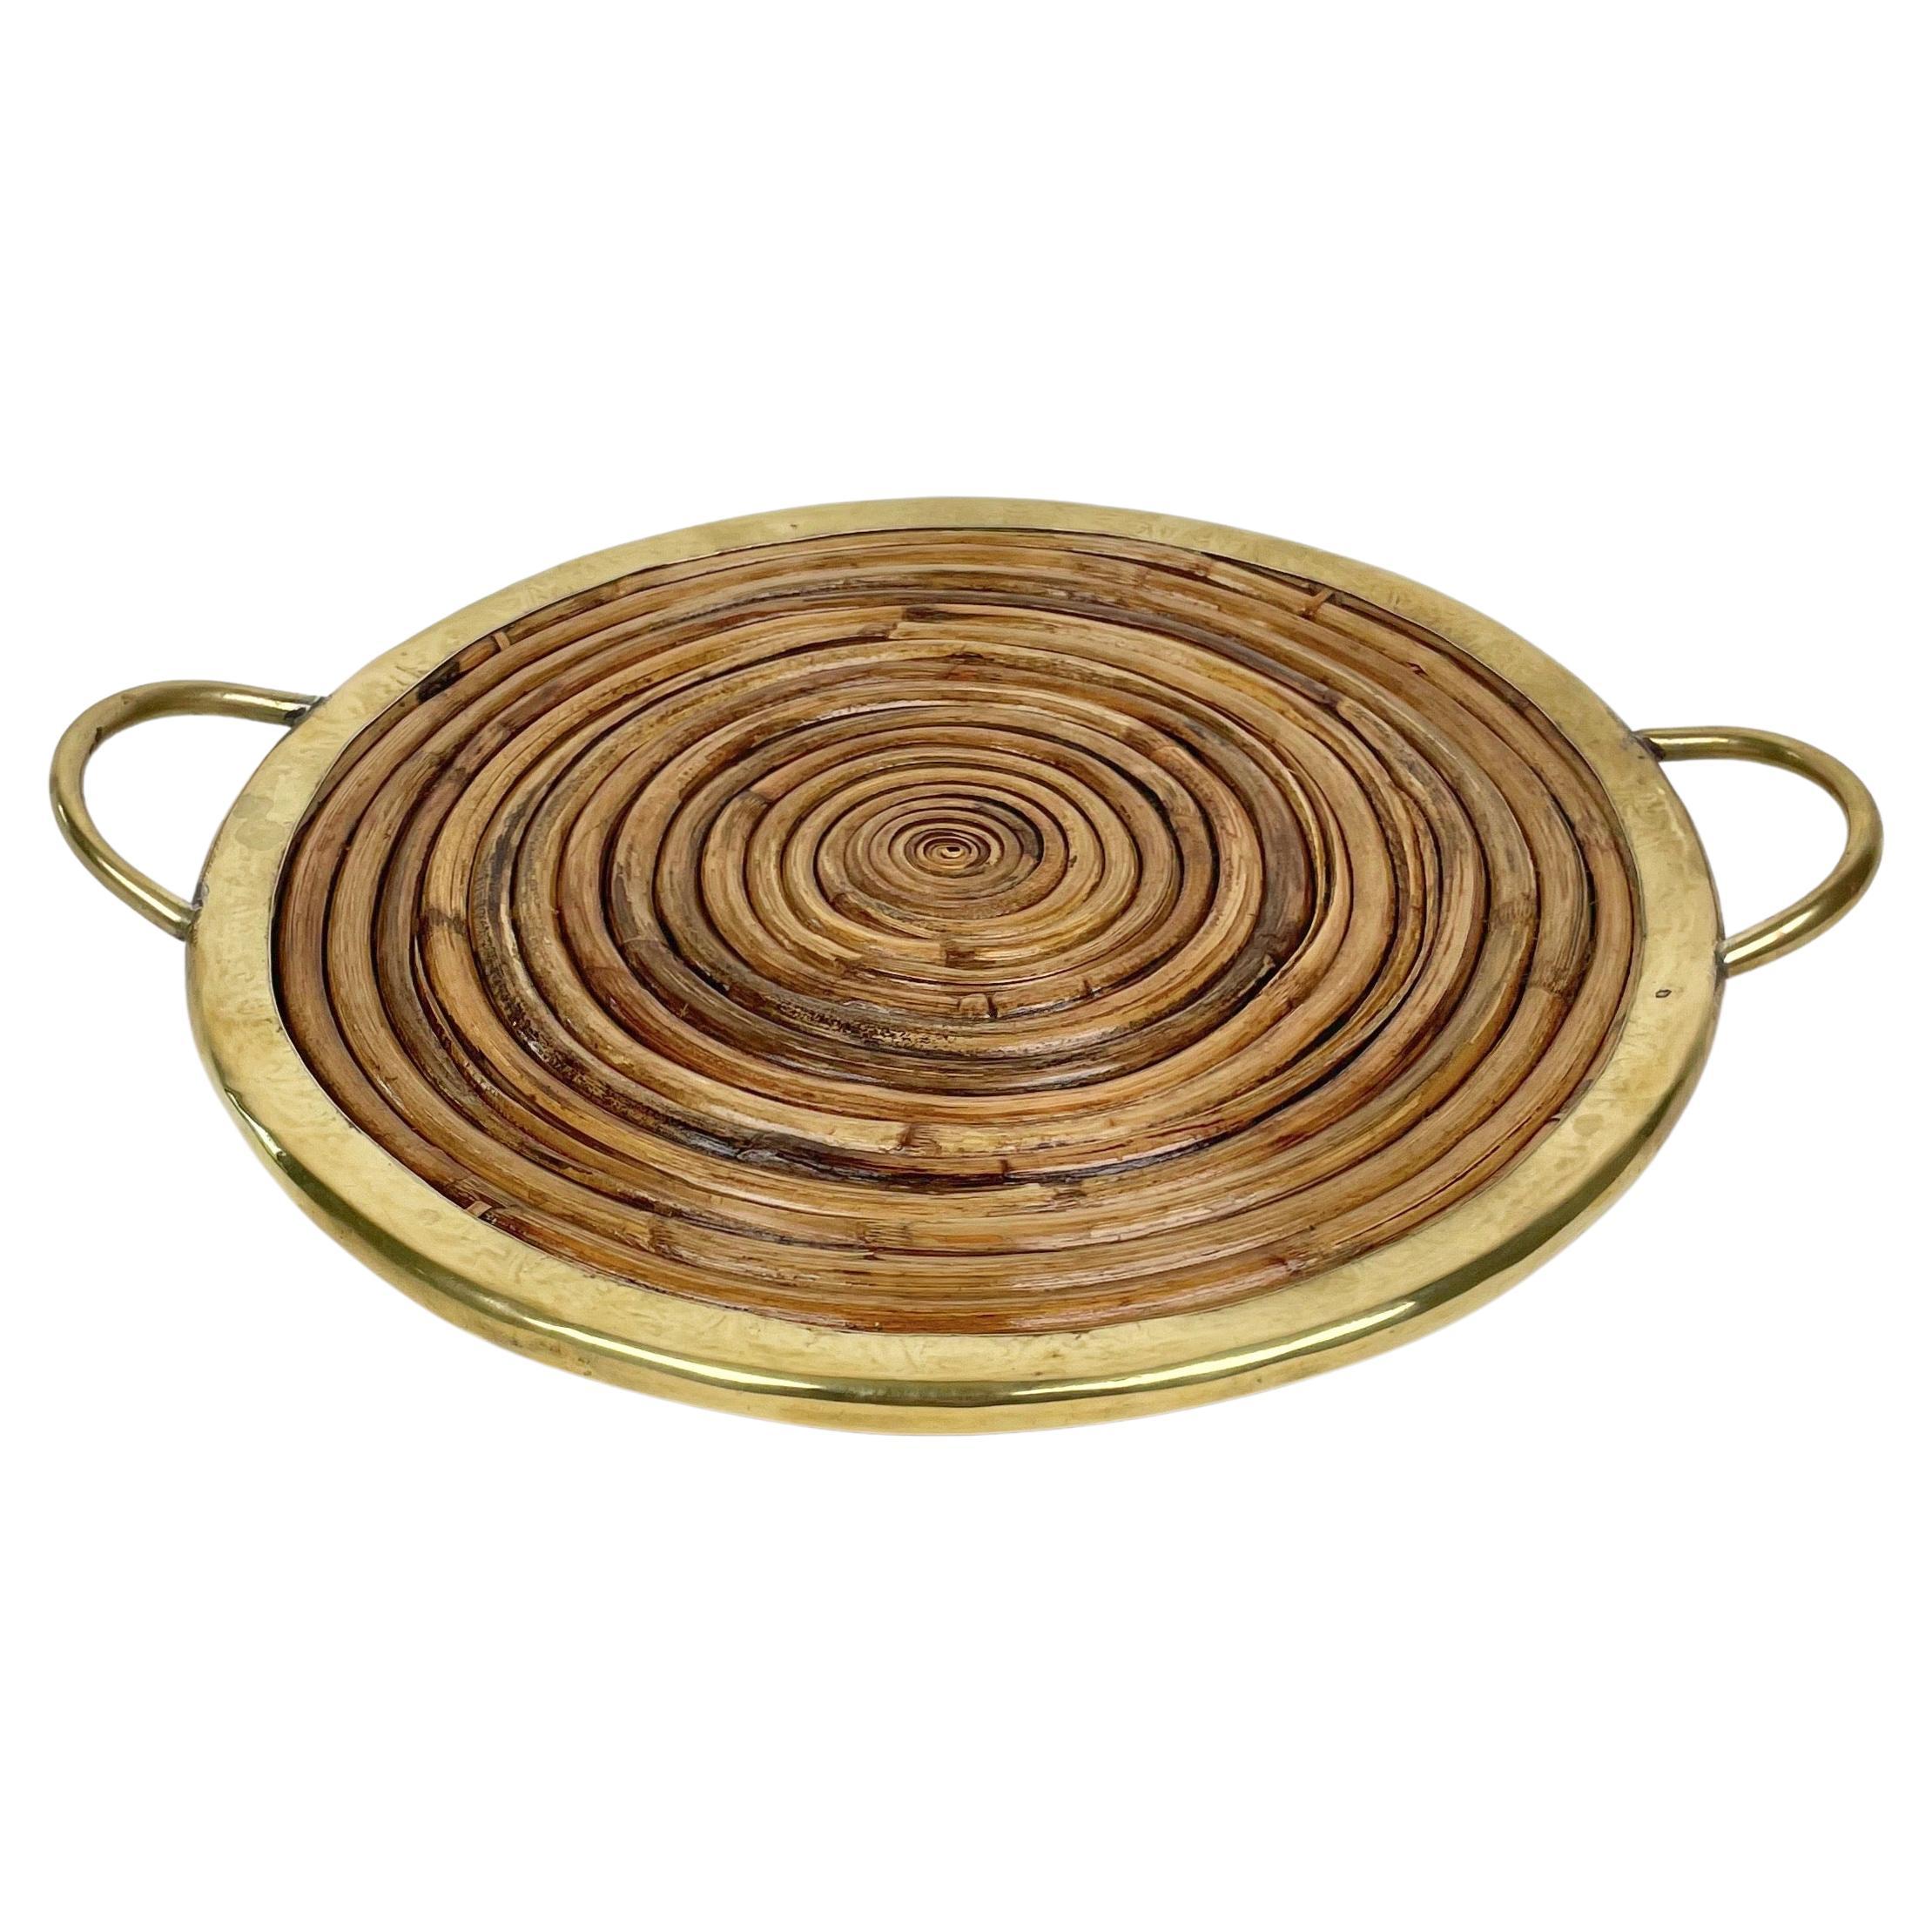 Round serving tray in bamboo and brass details,.

Made in Italy in the 1970s.
